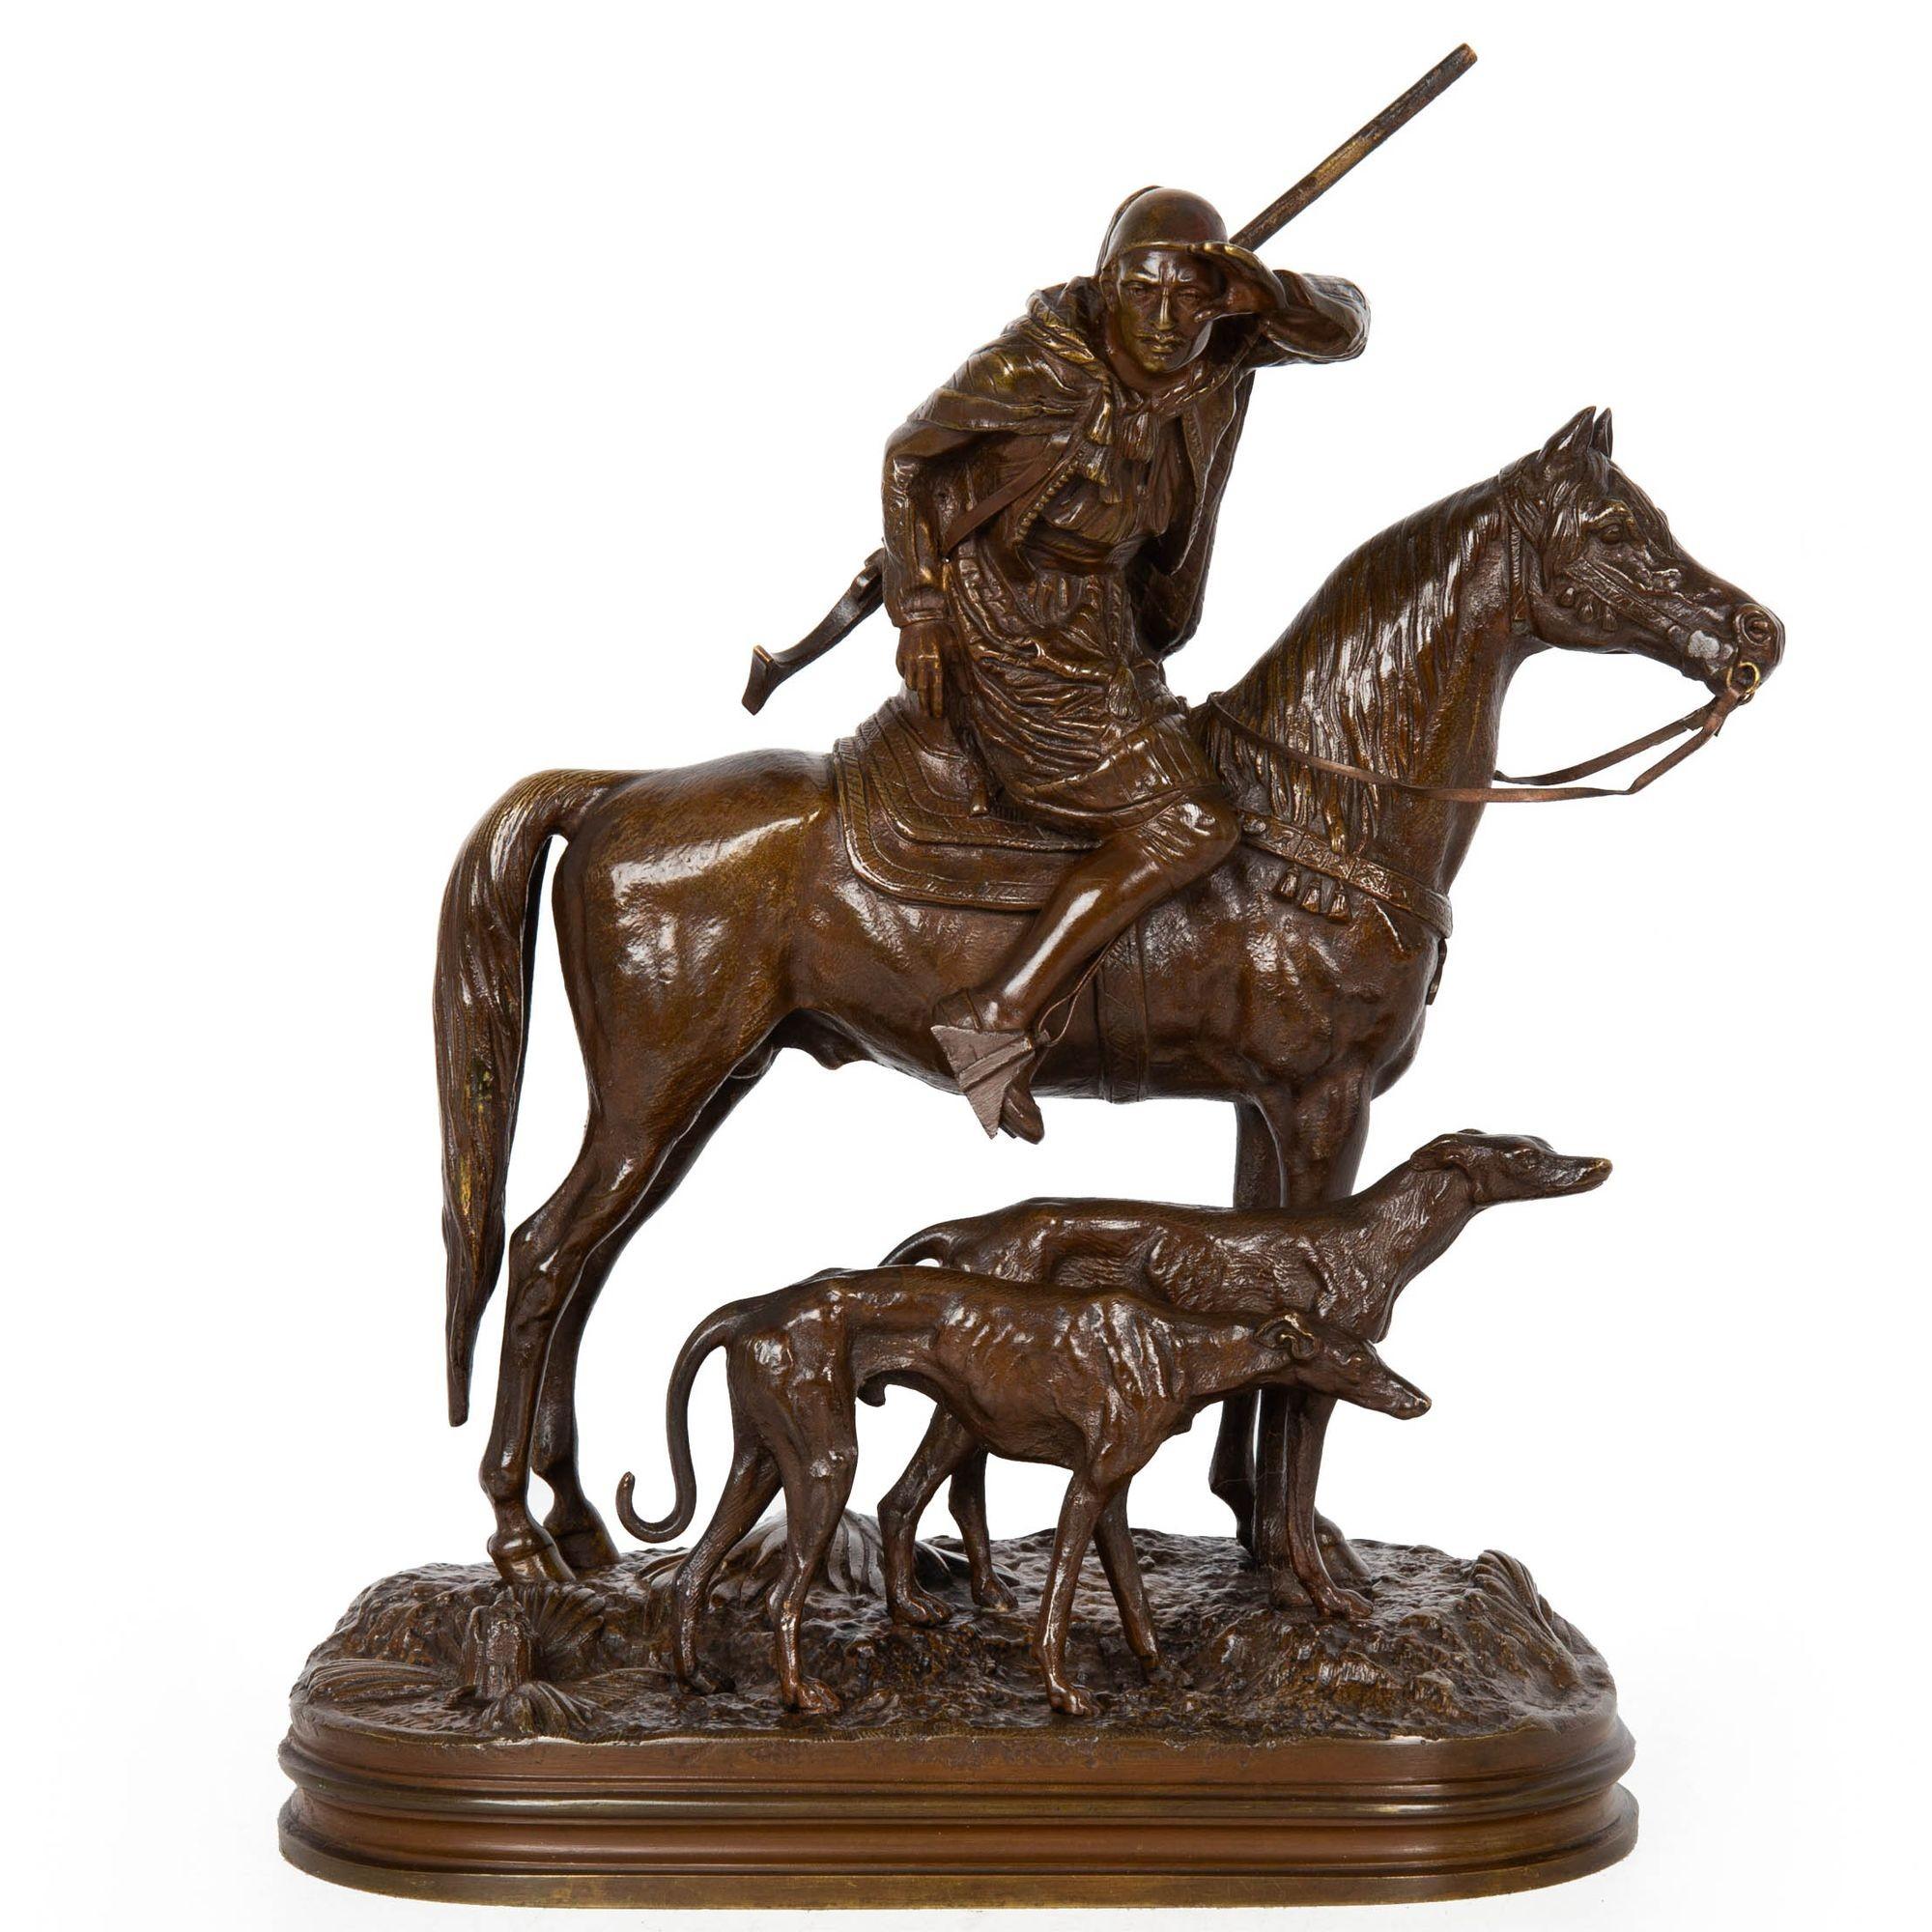 A rarely found model of Dubucand's Arab Hunter on Horseback, this is the smaller 